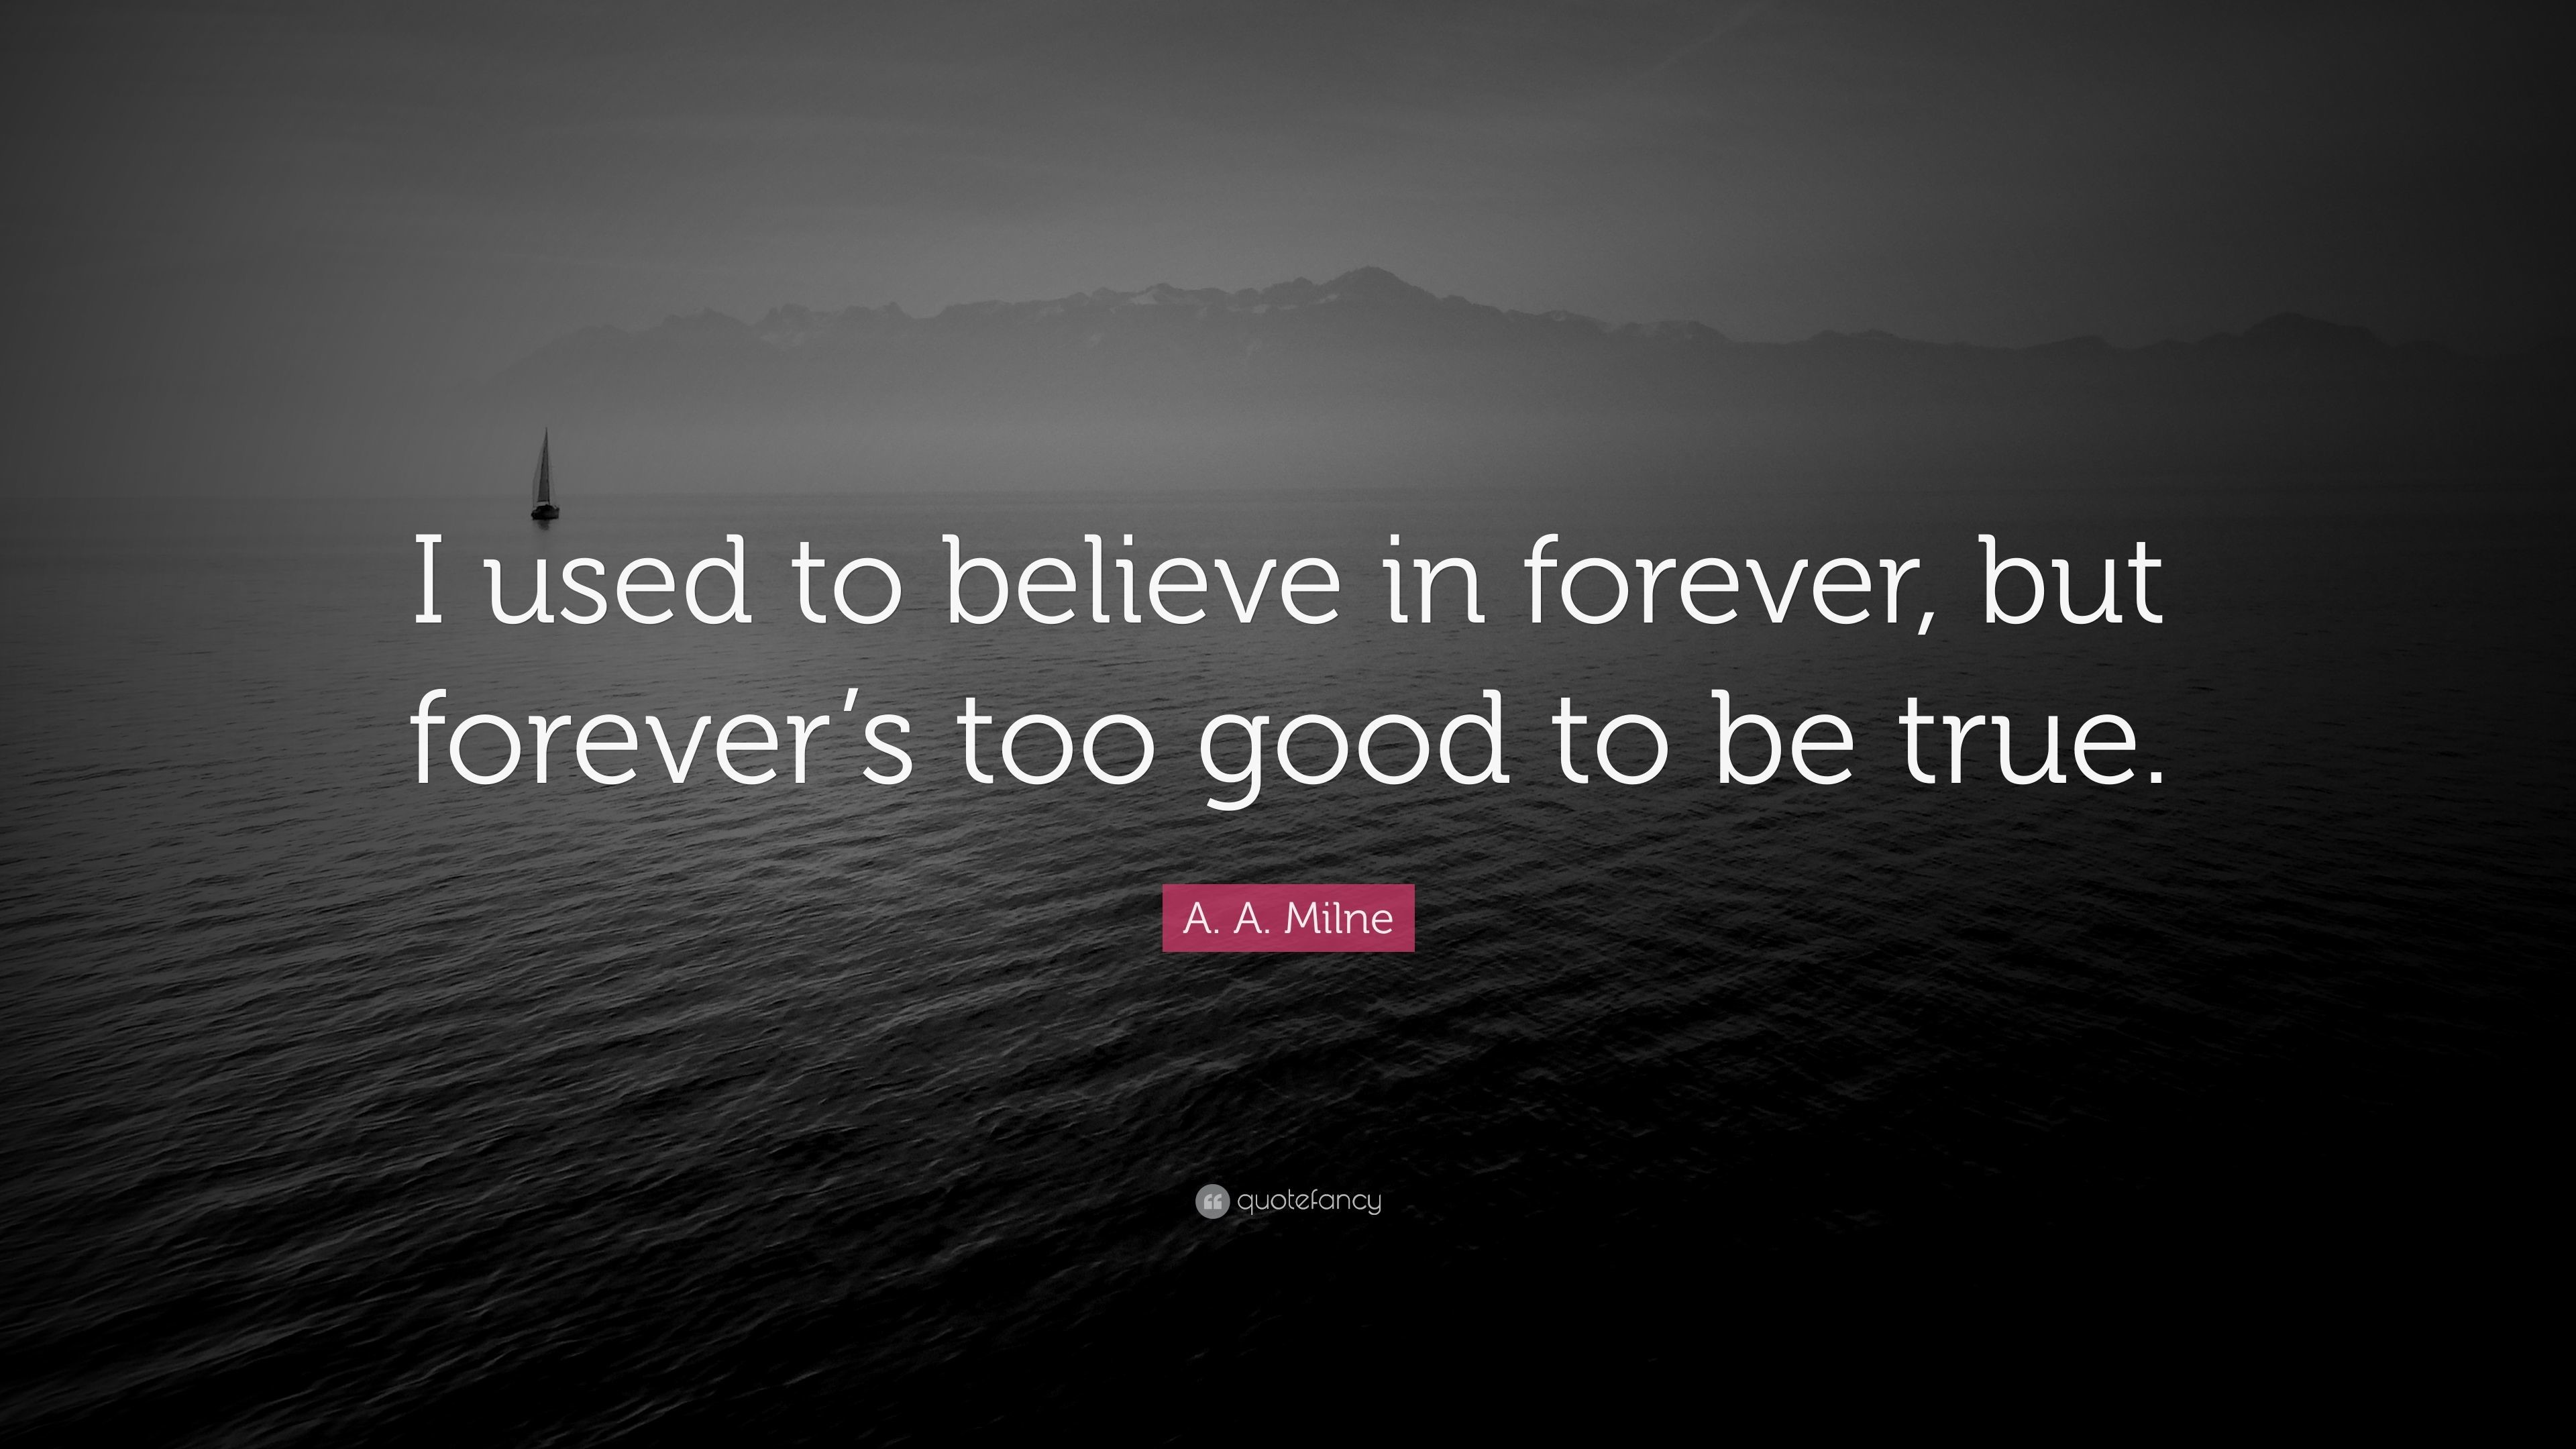 A. A. Milne Quote: “I used to believe in forever, but forever's too good